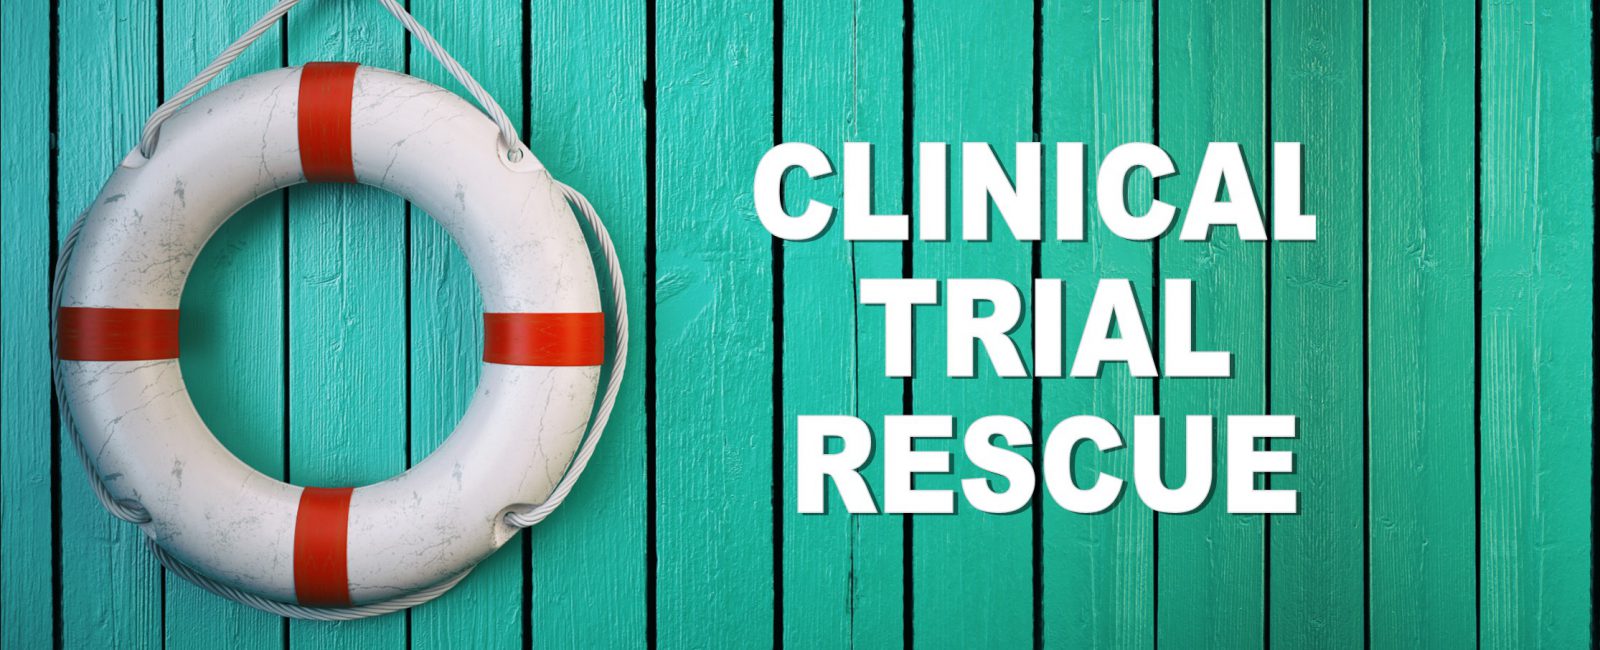 Six Ways To Reduce The Need For A Clinical Study Rescue